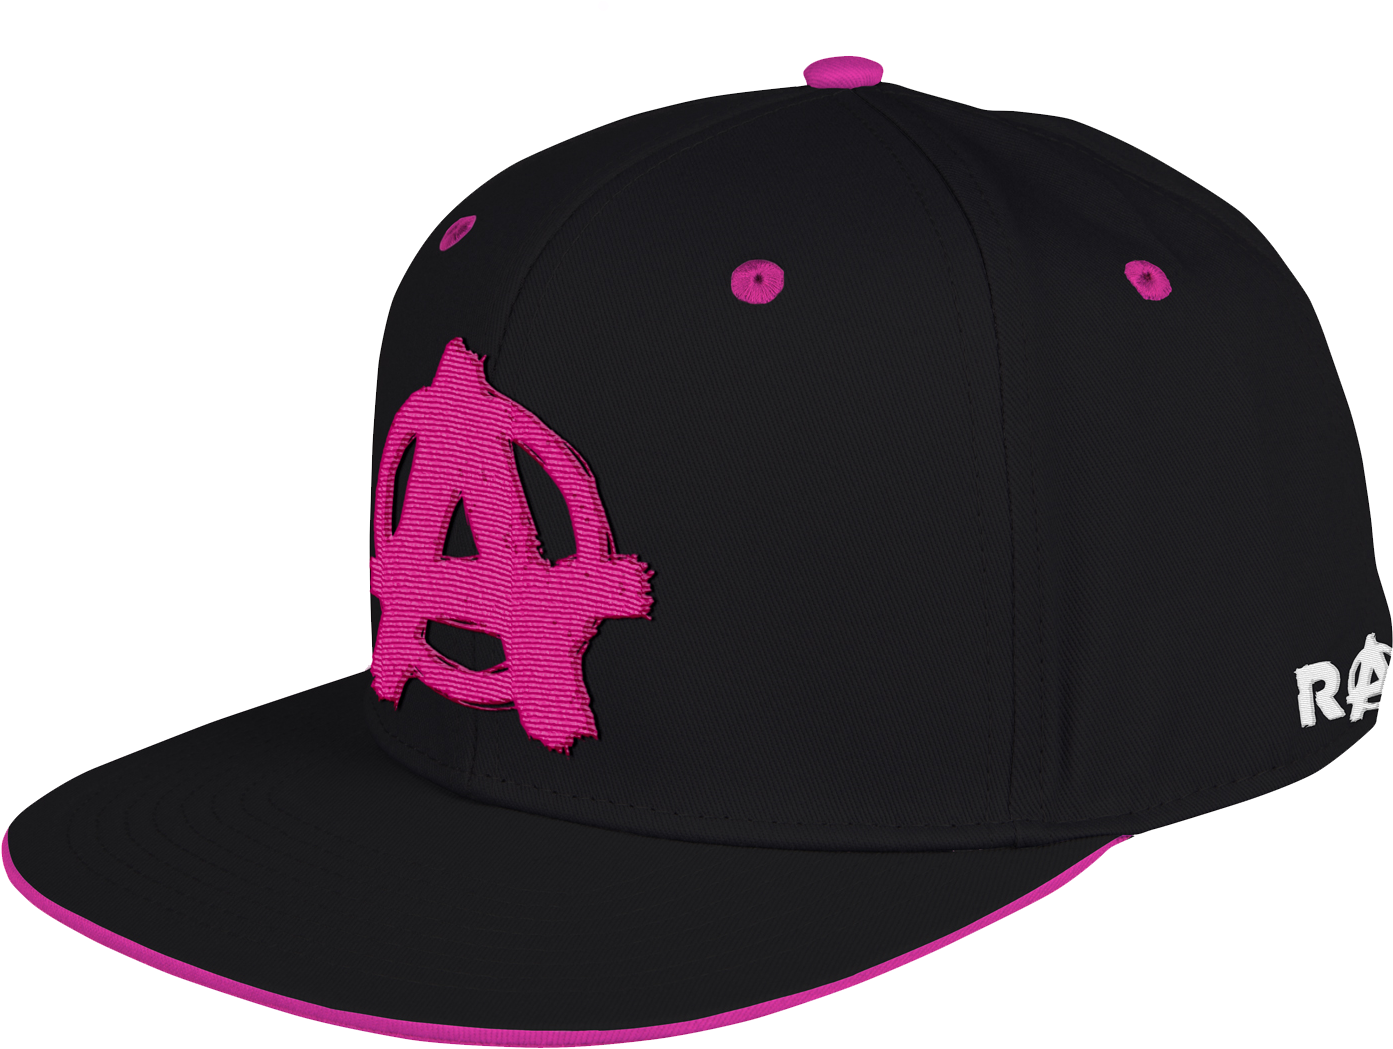 A Black And Pink Hat With A Logo